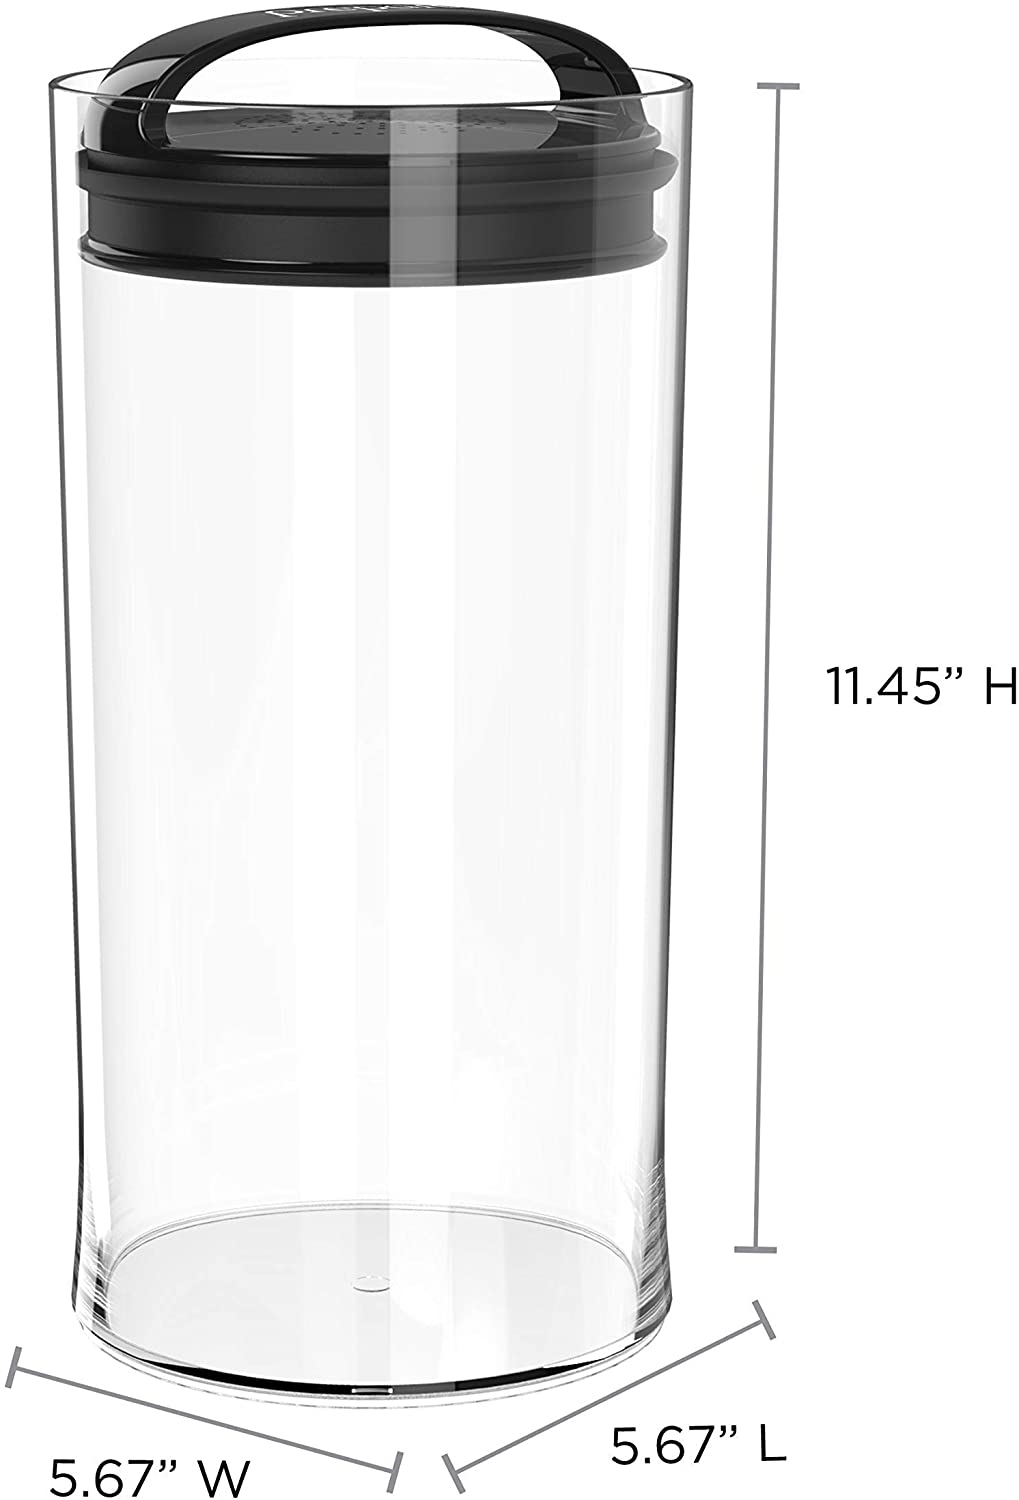 Prepara Evak Compact 0.5 Qt. Clear Glass Round Airtight Food Storage  Container with Push Down Lid 3018